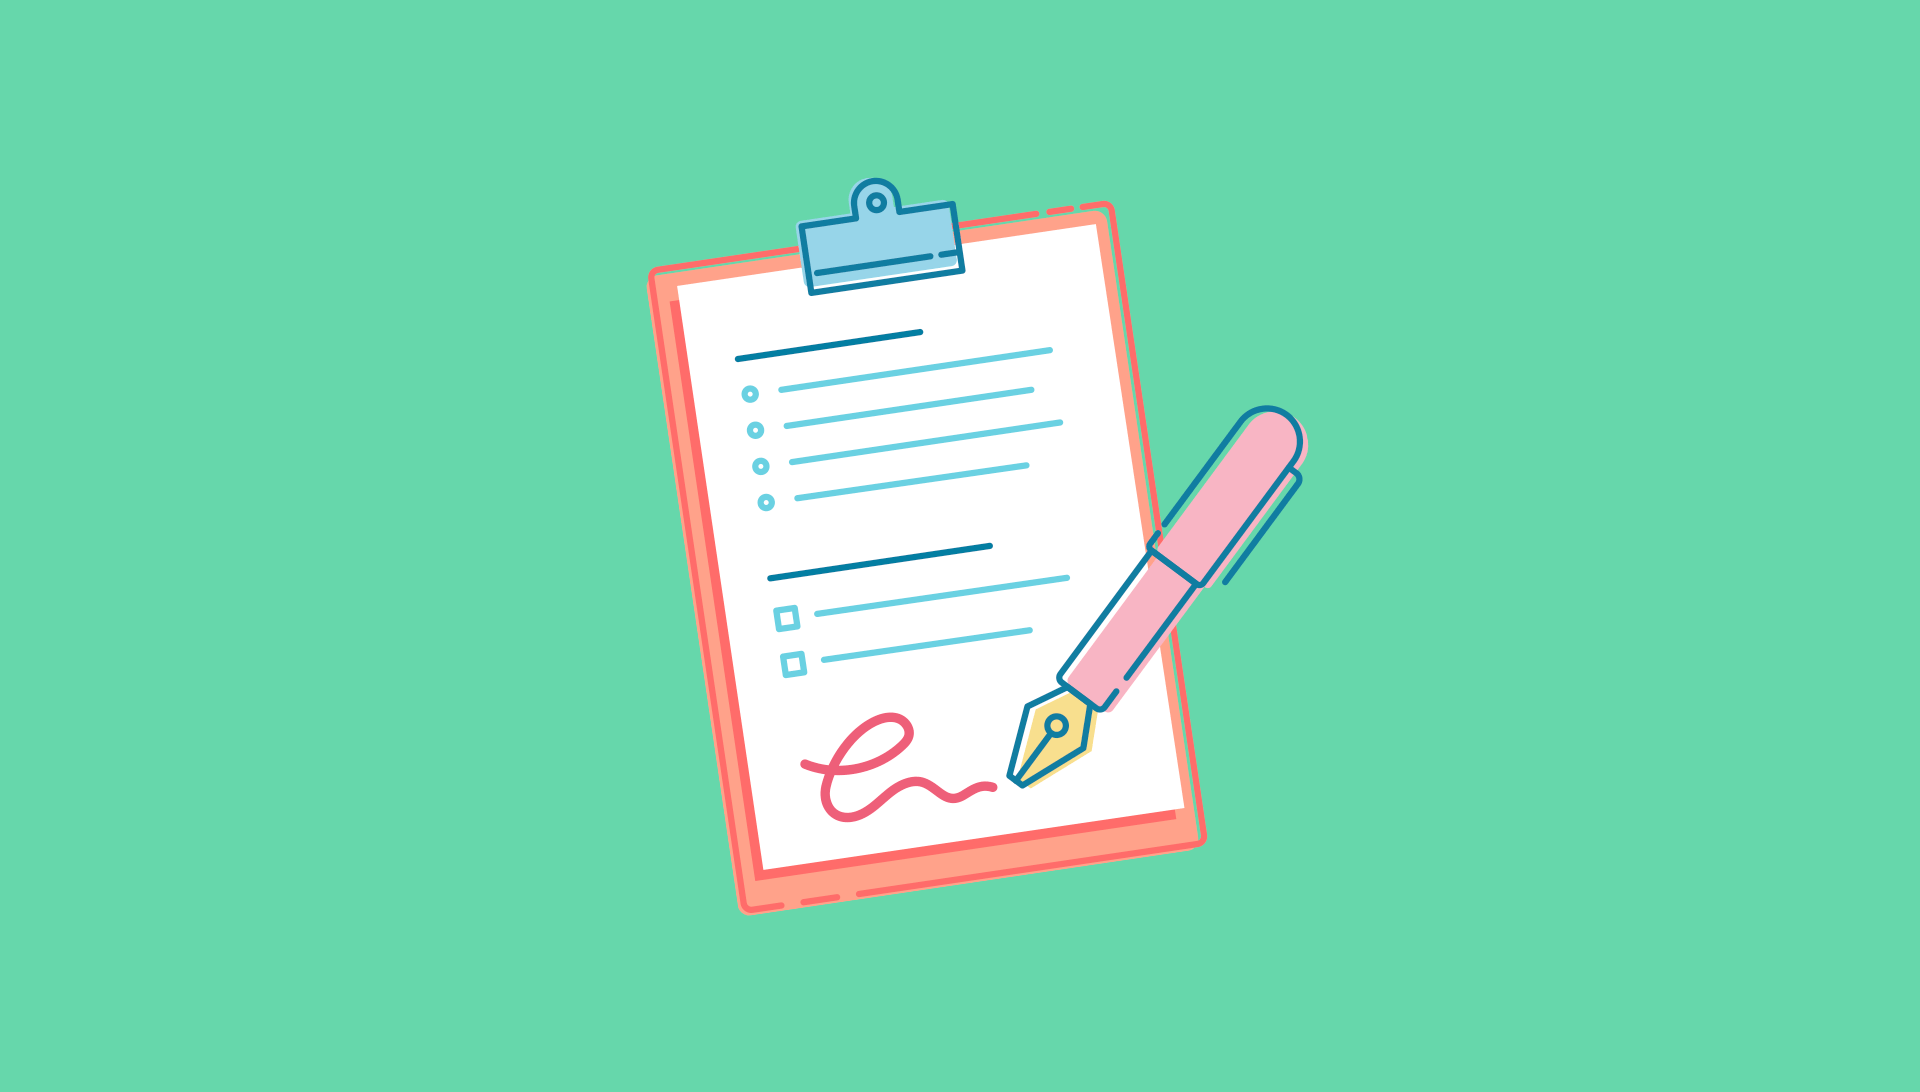 An illustration of a pen signing a form on a clipboard